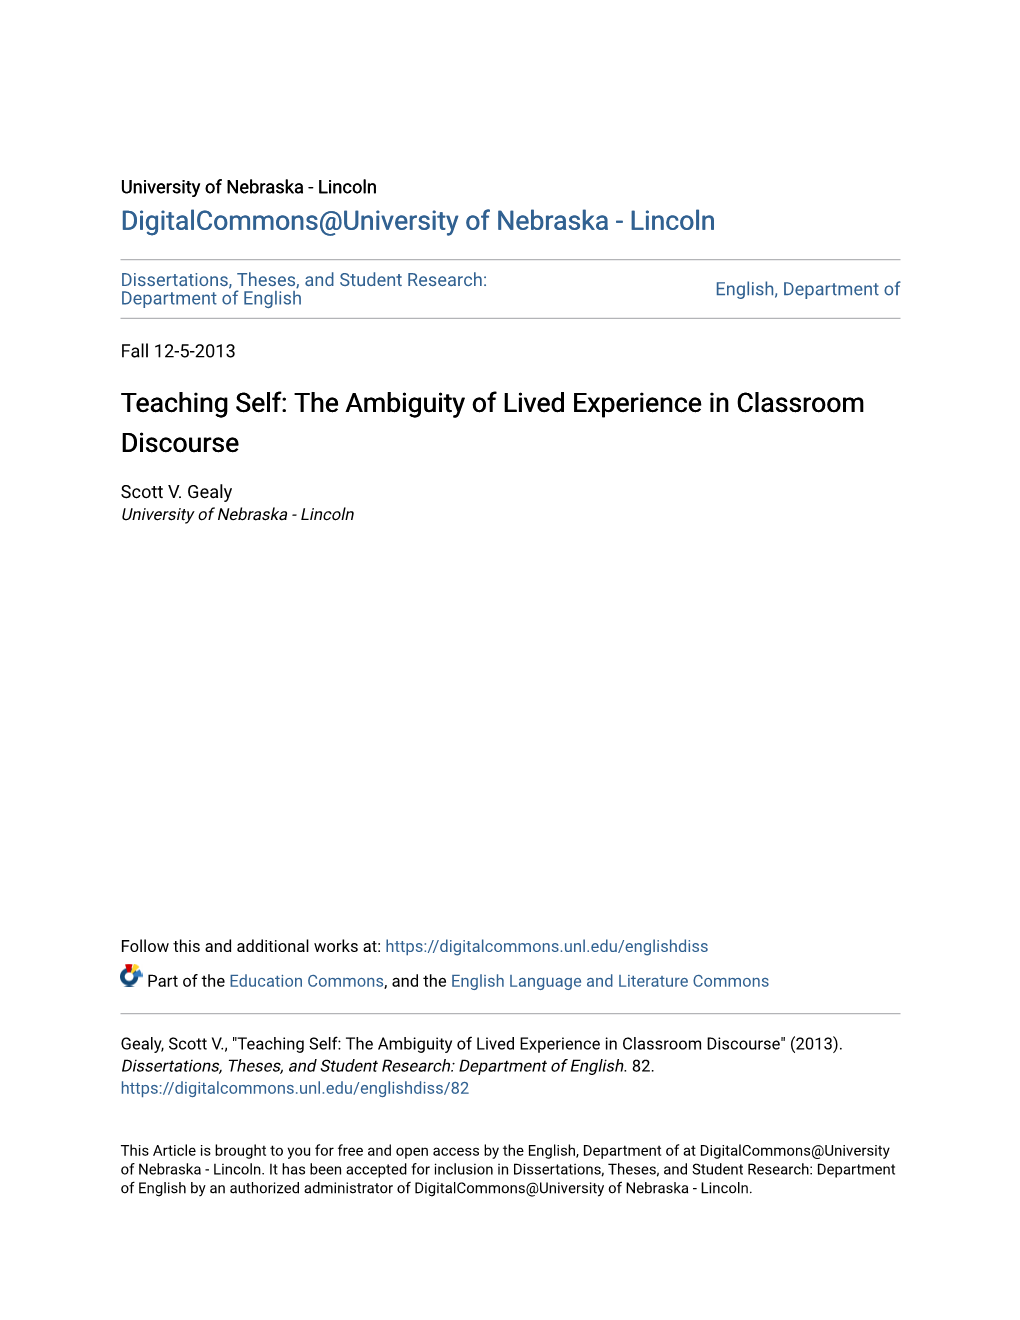 Teaching Self: the Ambiguity of Lived Experience in Classroom Discourse